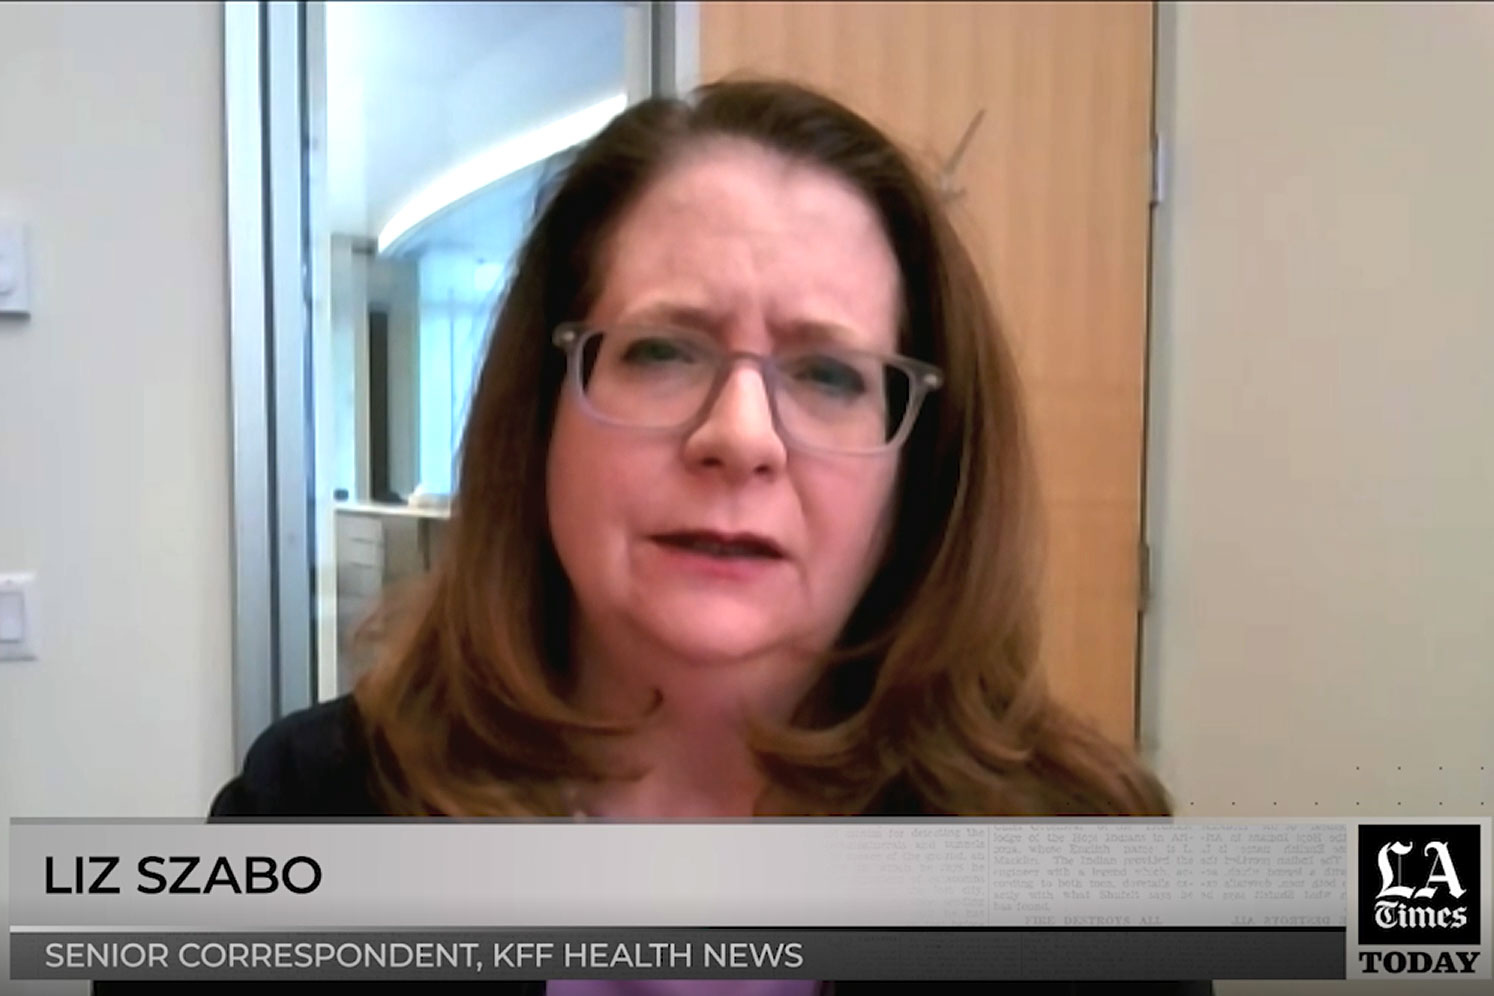 A woman looks at the camera and speaks. The lower third reads "Liz Szabo, Senior Correspondent, KFF Health News" and "Los Angeles Times Today".